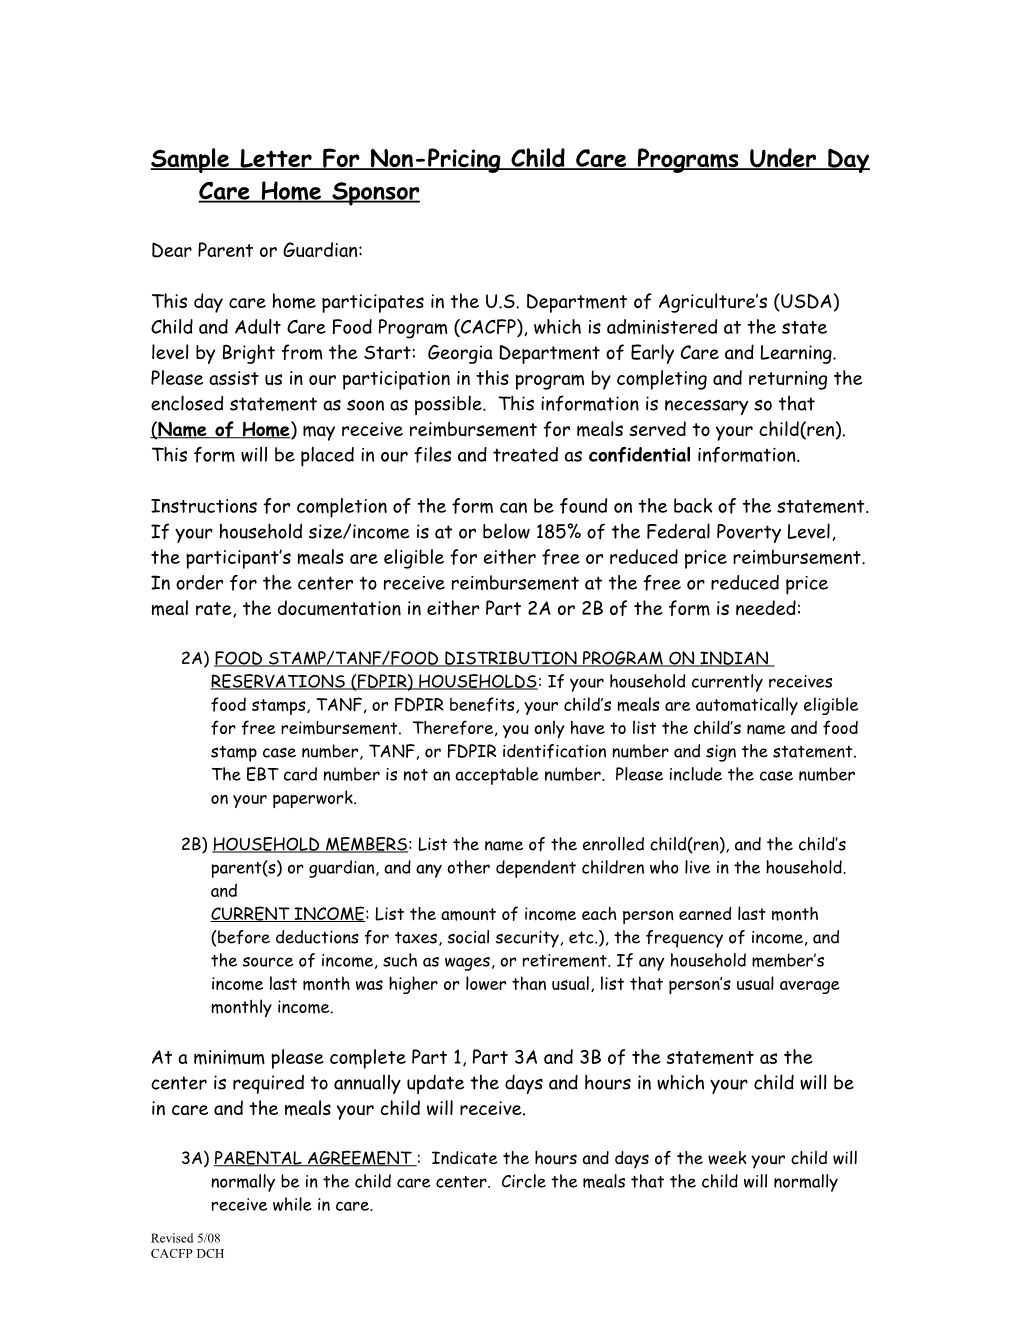 Sample Letter for Non-Pricing & Pricing Child/Adult Care Programs